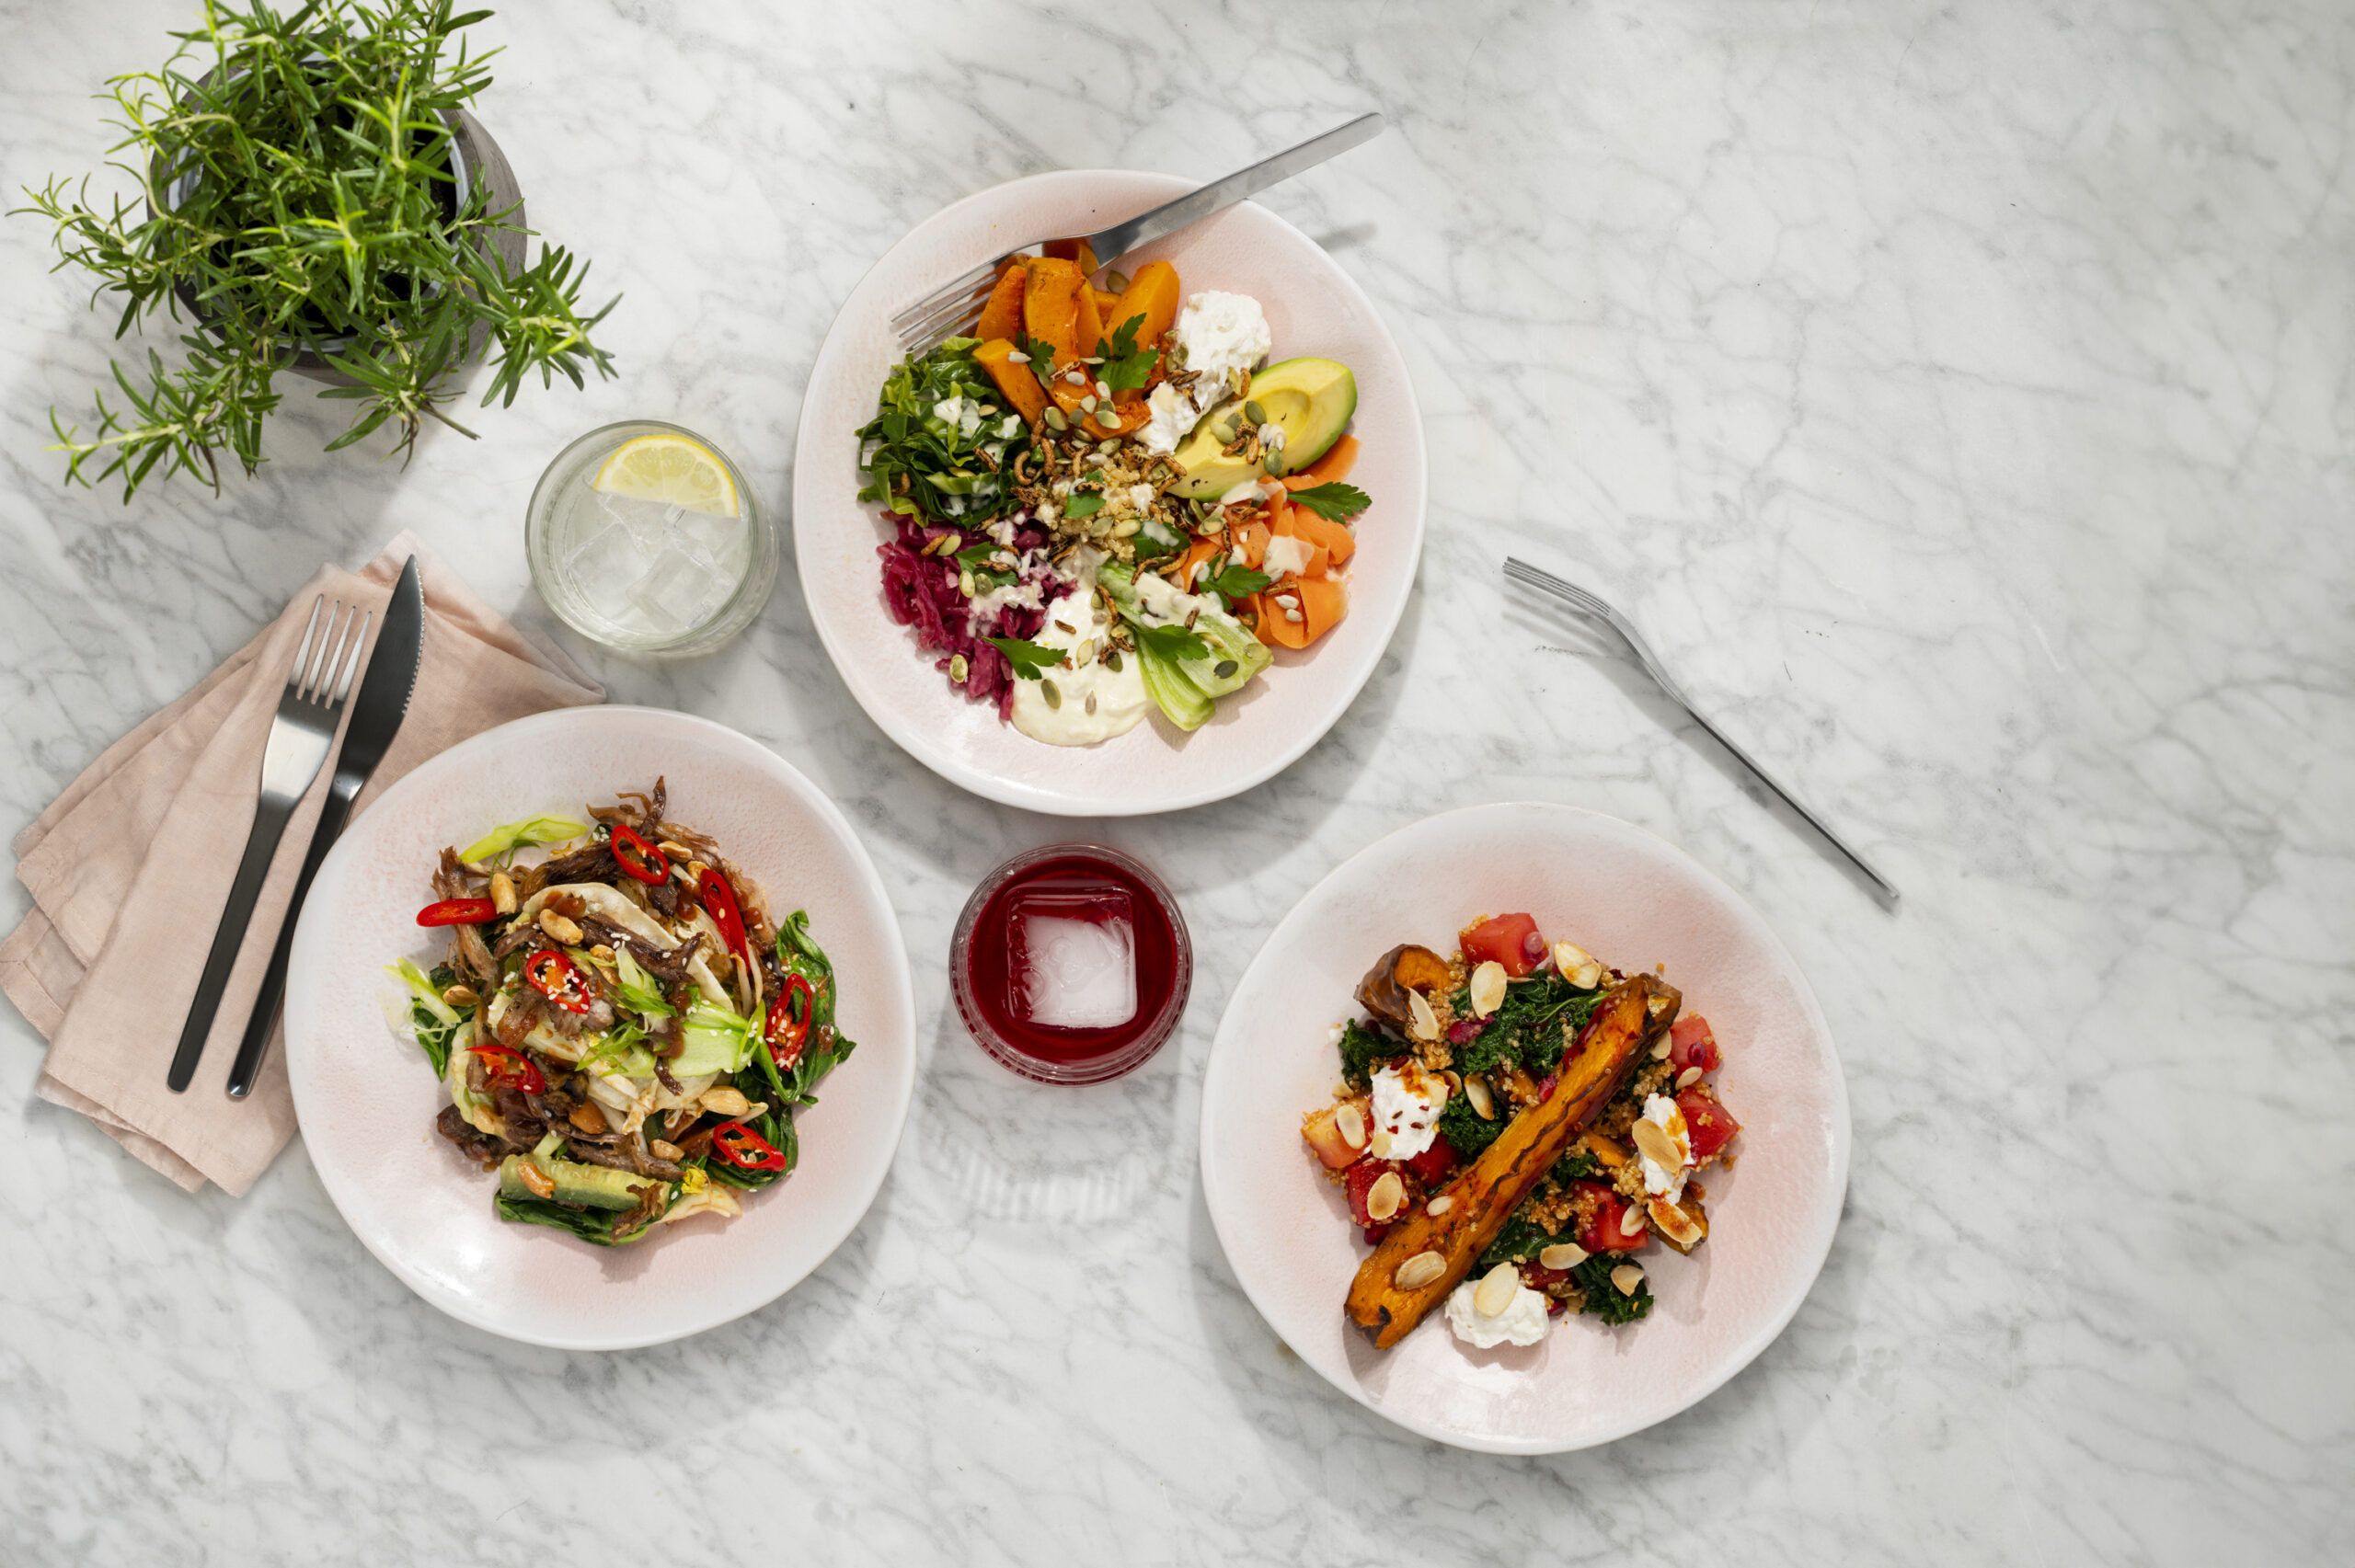 https://www.drakeandmorgan.co.uk/the-refinery-citypoint/wp-content/uploads/2024/02/Z-Salads-02-scaled.jpg